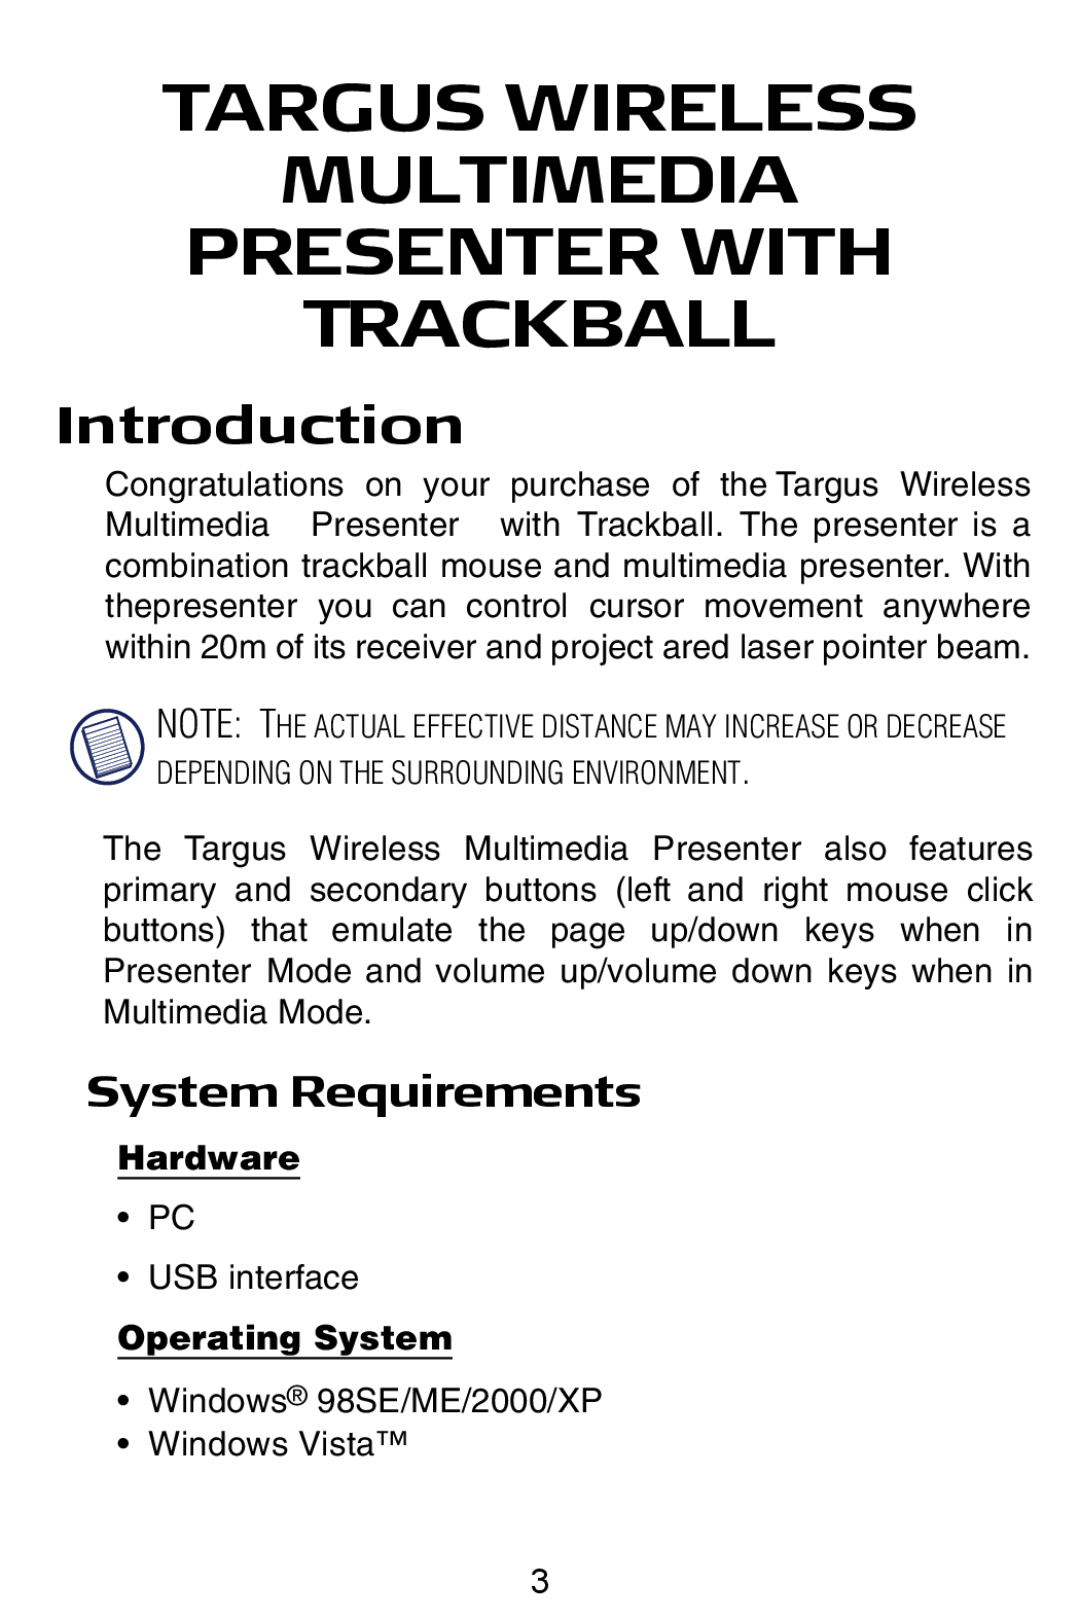 Targus Wireless Multimedia Presenter with Trackball manual Introduction, System Requirements 